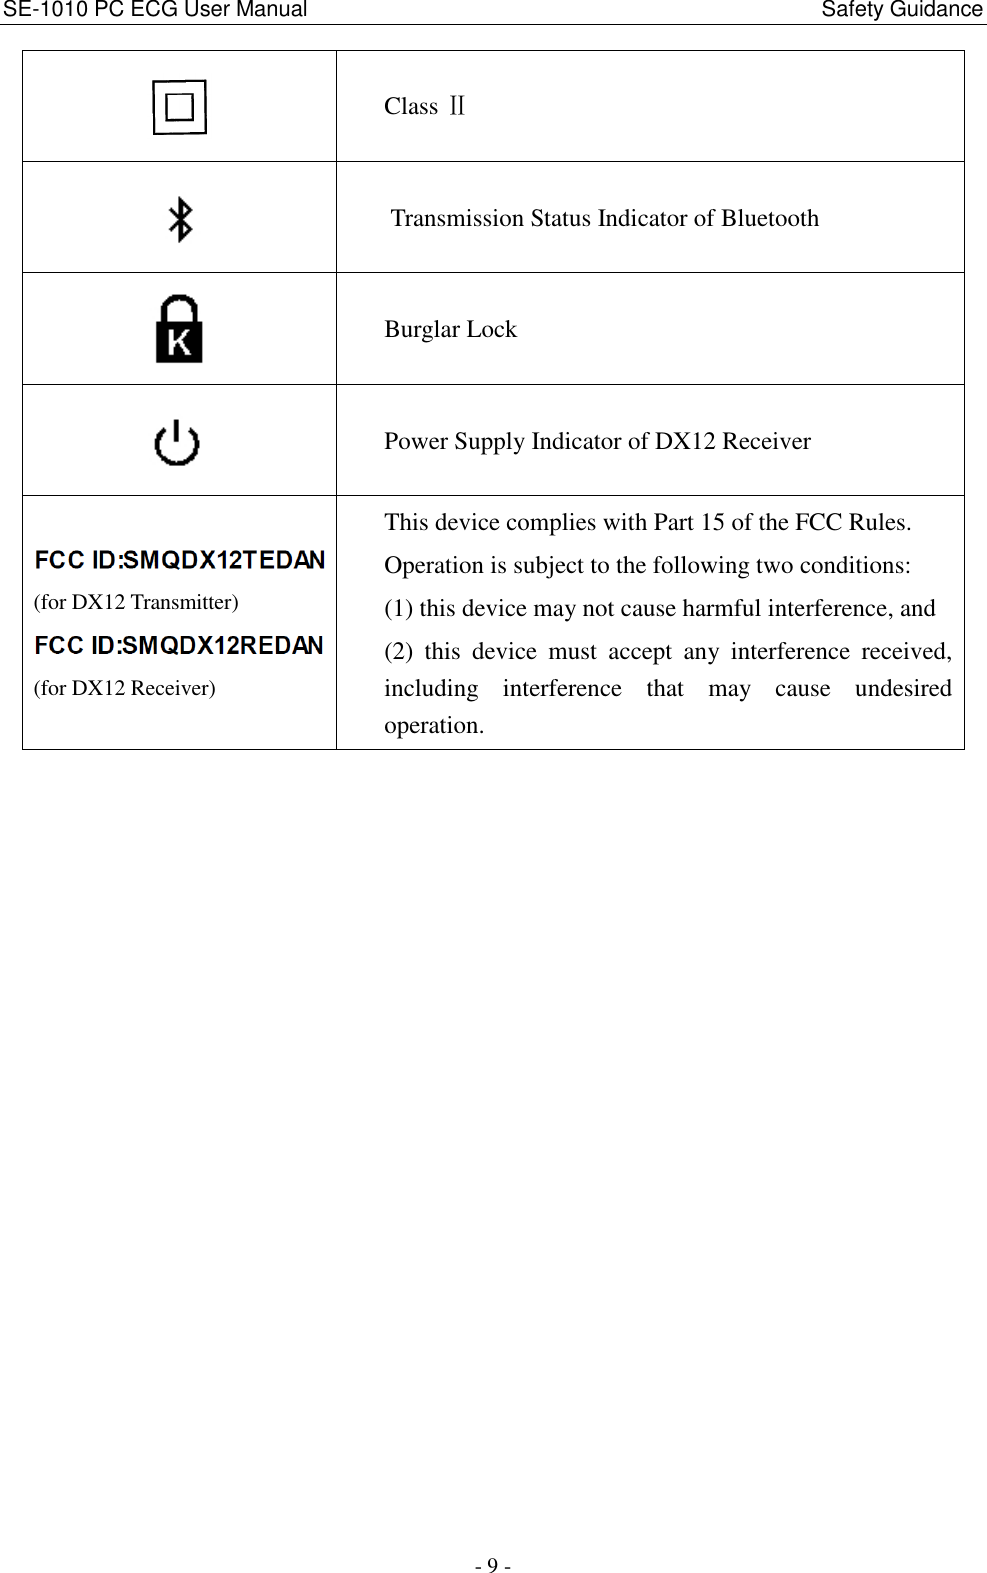 SE-1010 PC ECG User Manual                                                                                              Safety Guidance - 9 -  Class Ⅱ  Transmission Status Indicator of Bluetooth  Burglar Lock  Power Supply Indicator of DX12 Receiver    (for DX12 Transmitter)  (for DX12 Receiver) This device complies with Part 15 of the FCC Rules.      Operation is subject to the following two conditions:     (1) this device may not cause harmful interference, and  (2)  this  device  must  accept  any  interference  received, including  interference  that  may  cause  undesired operation. 